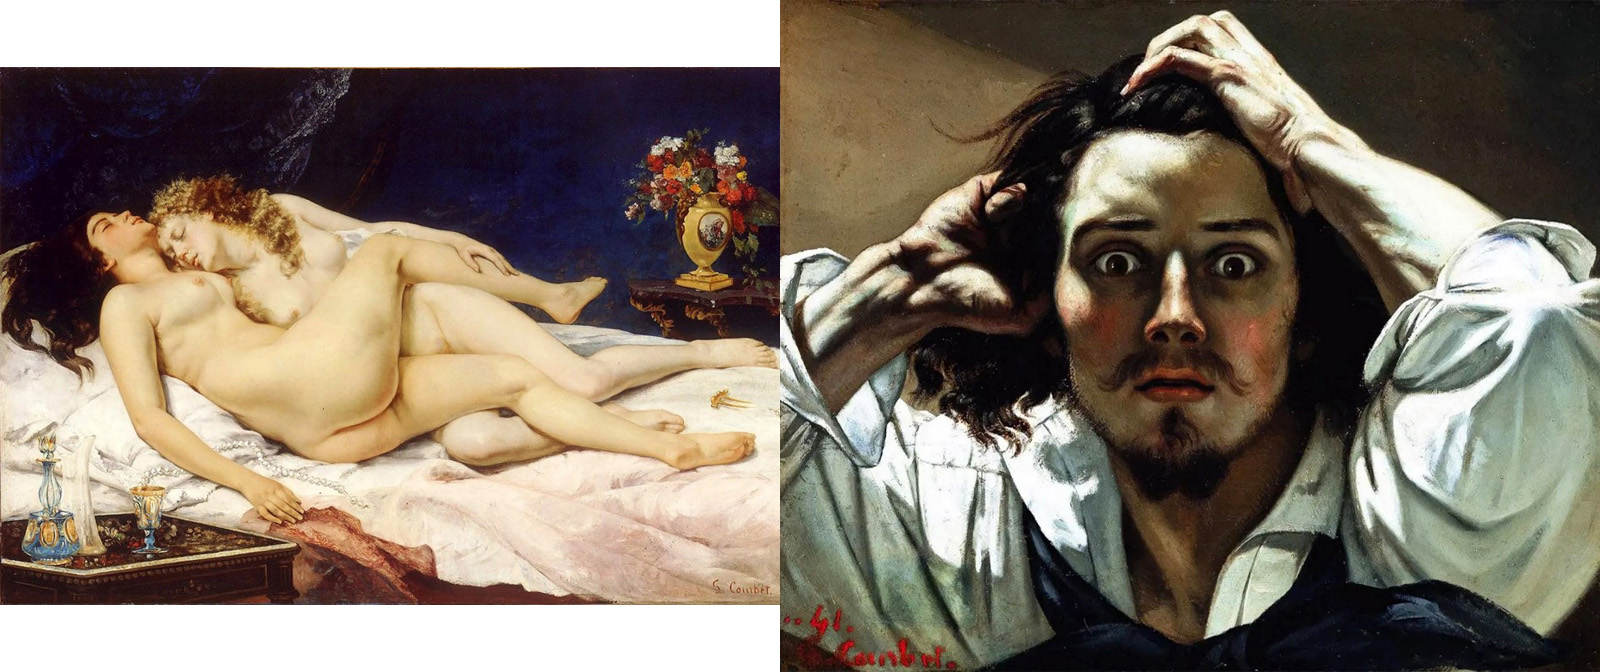 The scandalous paintings of an illiterate big man with an exorbitant ego. Was he Gustave Courbet in ordinary life?